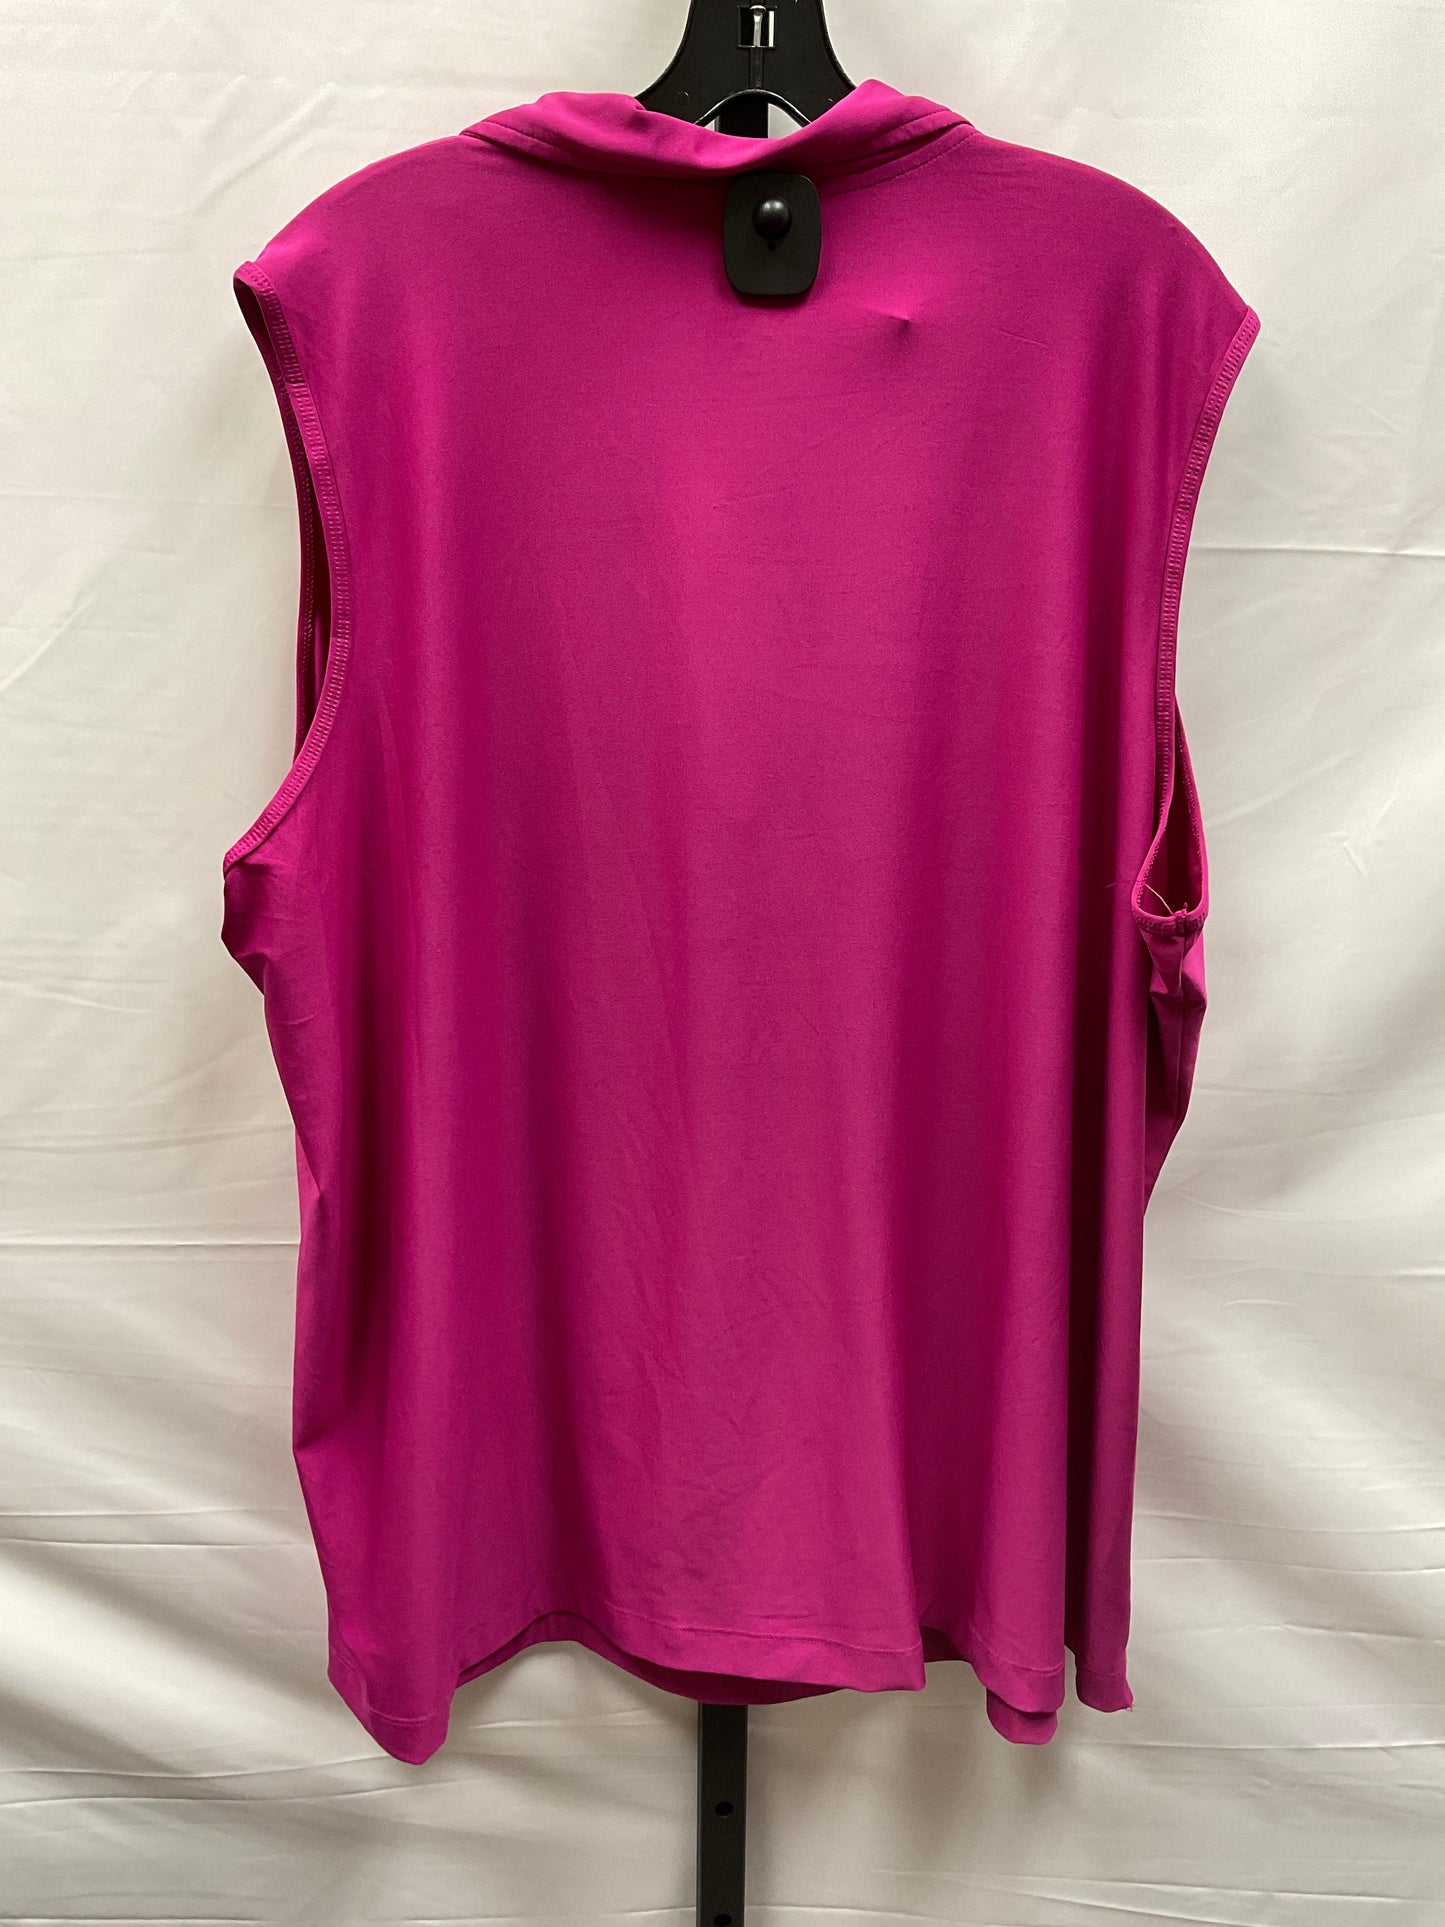 Pink Top Sleeveless Croft And Barrow, Size 3x